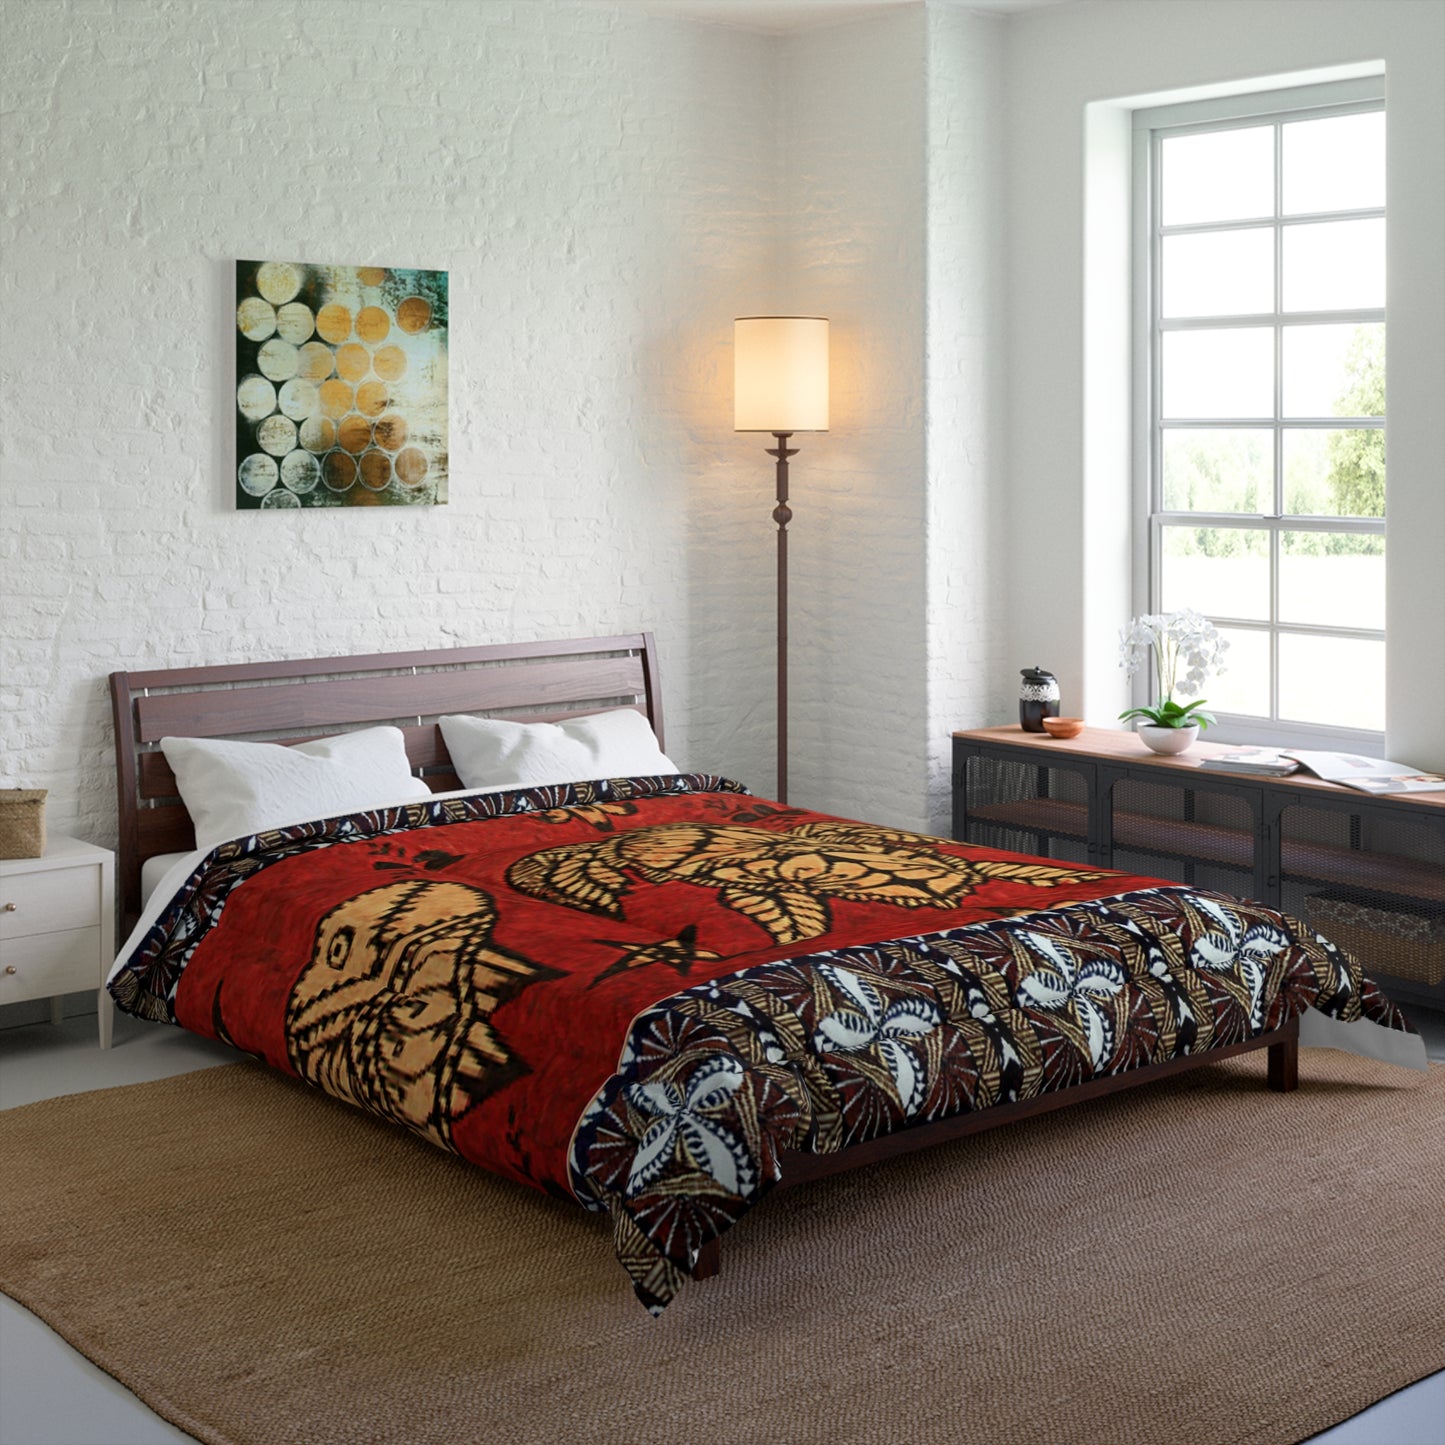 The Ultimate Comfort - Doona blanekts - with a Tapa Design